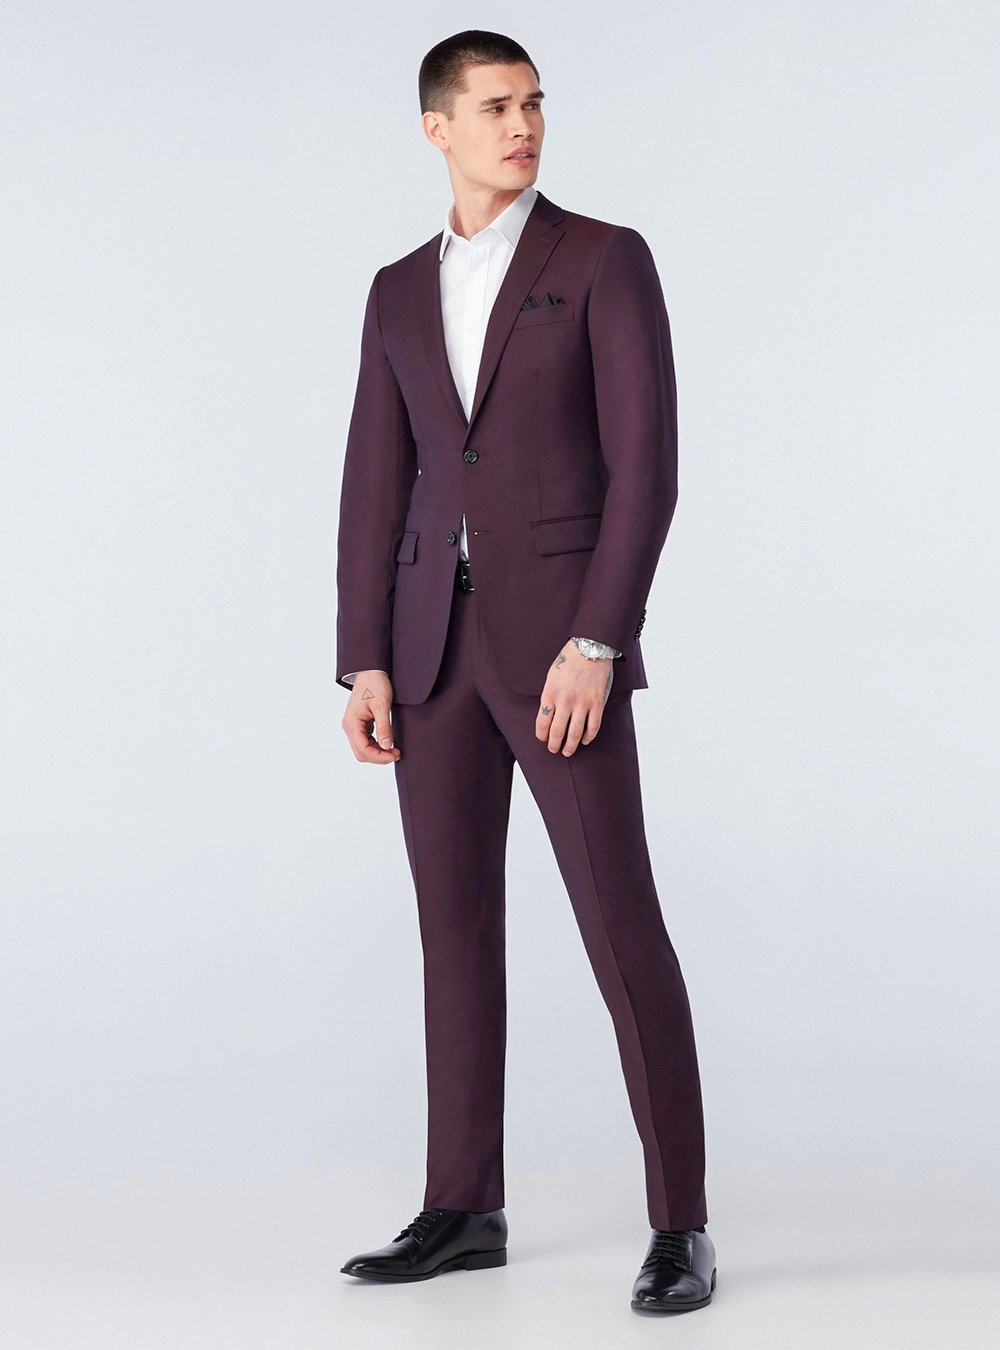 Burgundy suit, white dress shirt and black derby shoes